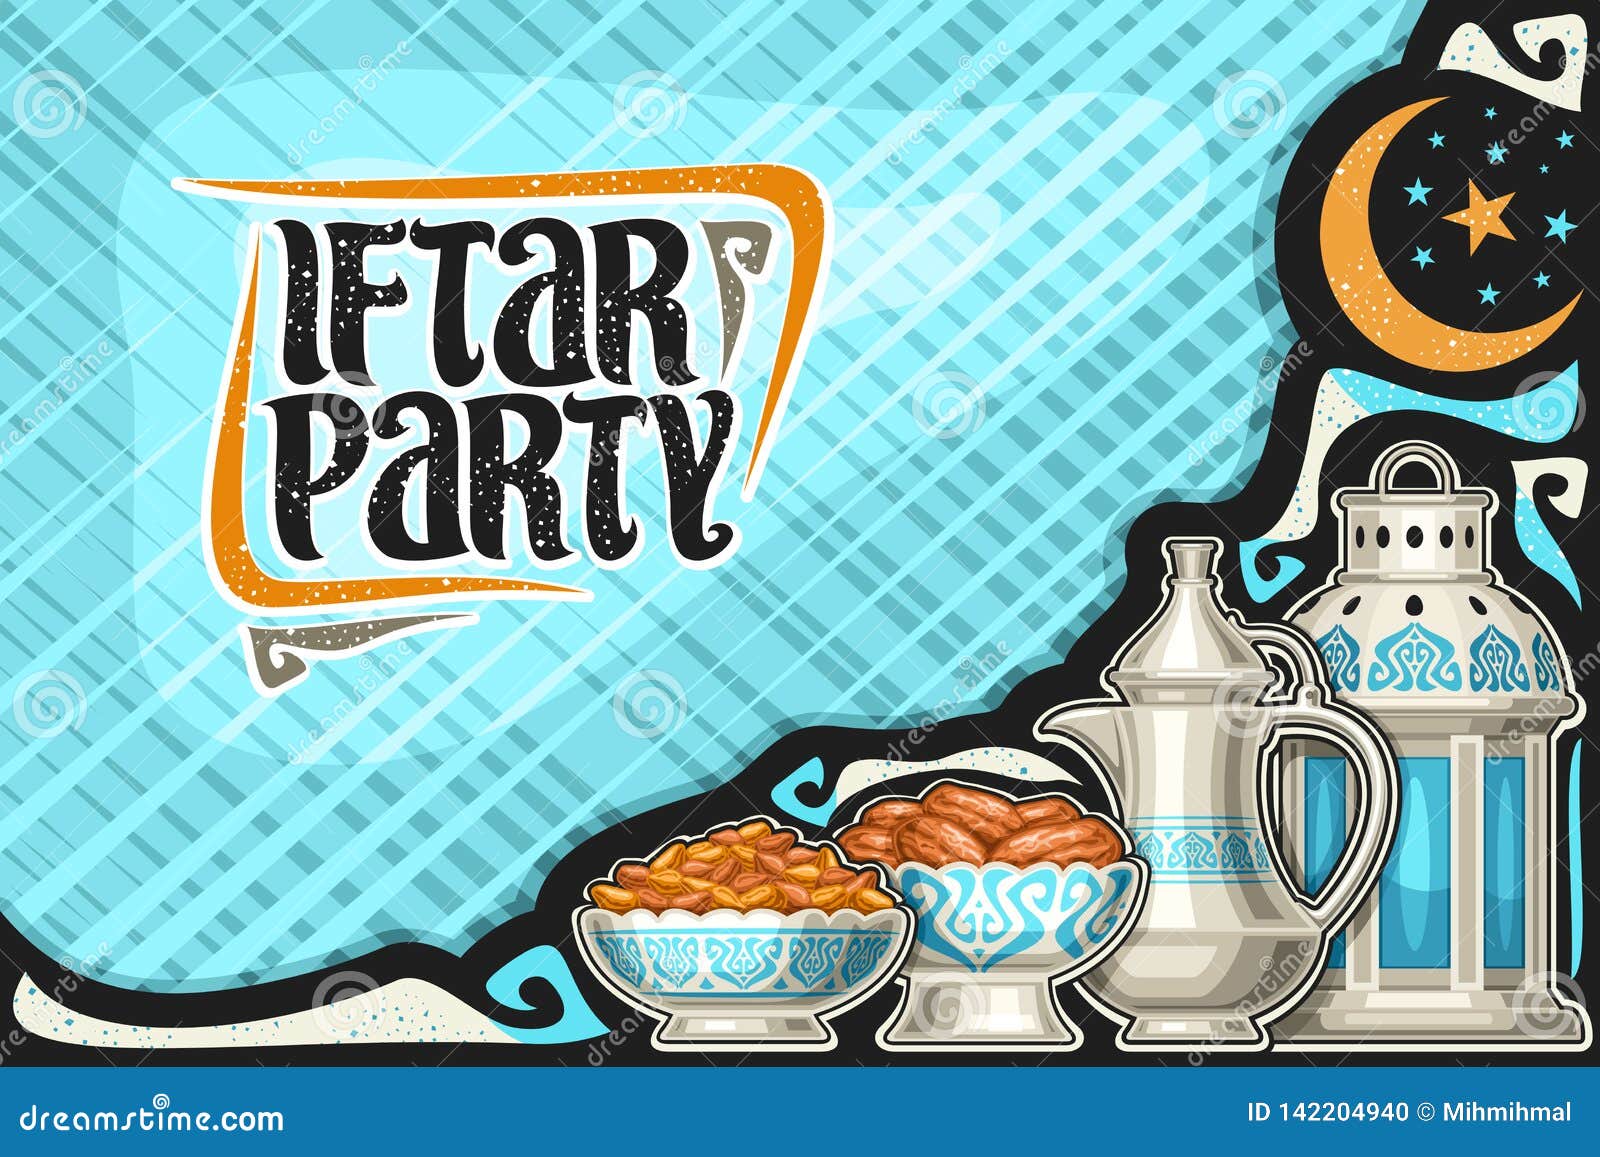 Vector Greeting Card For Iftar Party Stock Vector 